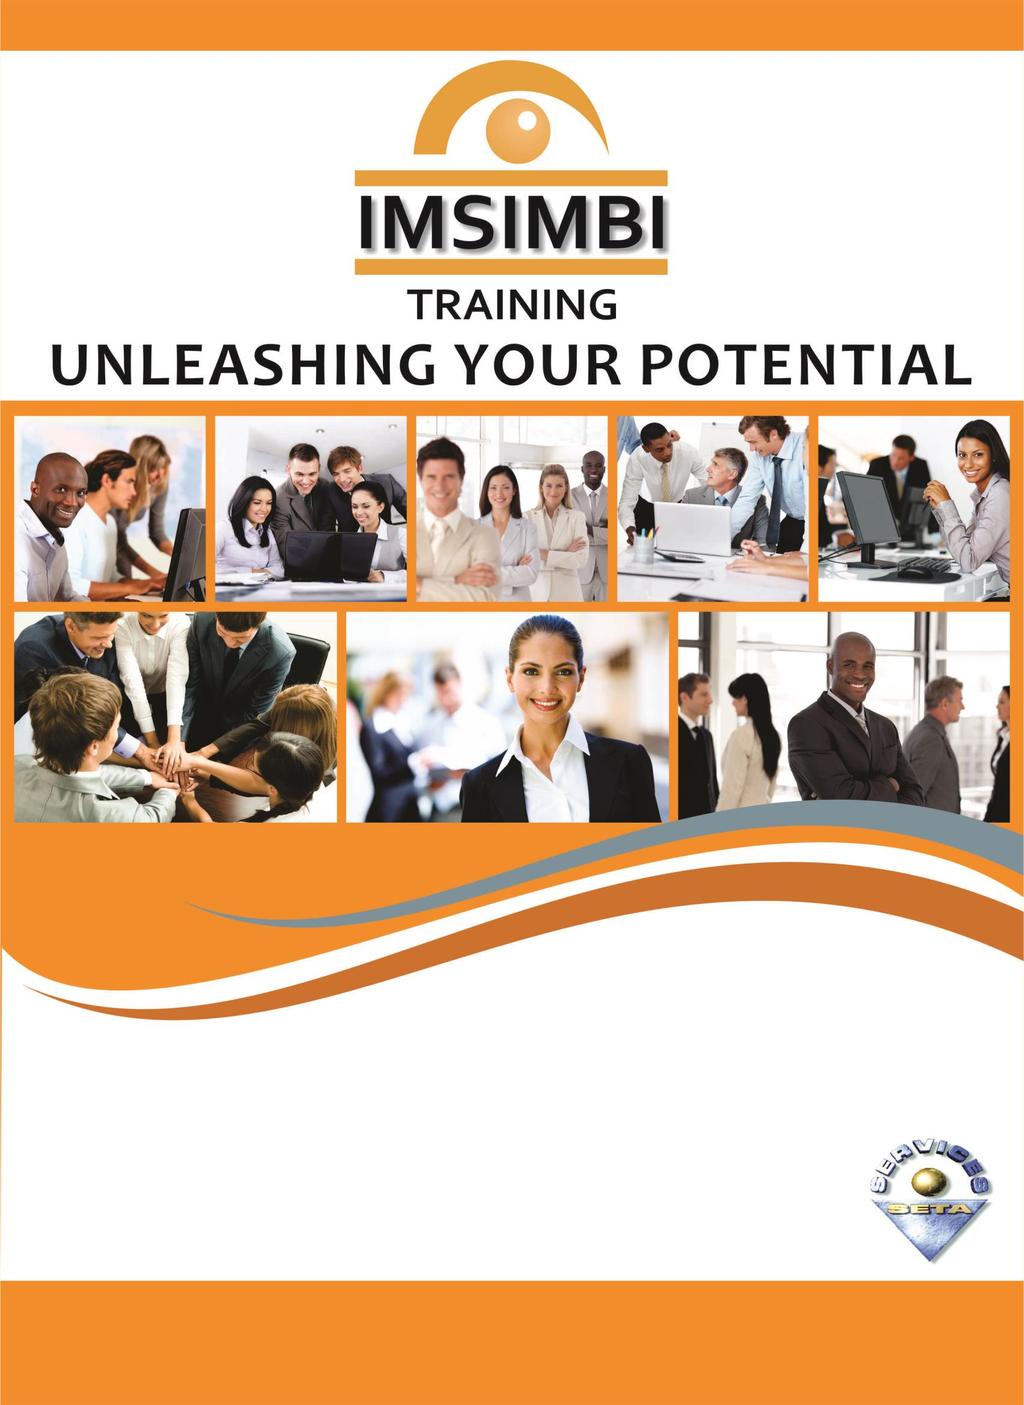 Schedule of Courses January June 2016 Imsimbi Training is a fully accredited training provider with the Services Seta, number 2147, as well as a Level 2 Contributor BBBEE company.